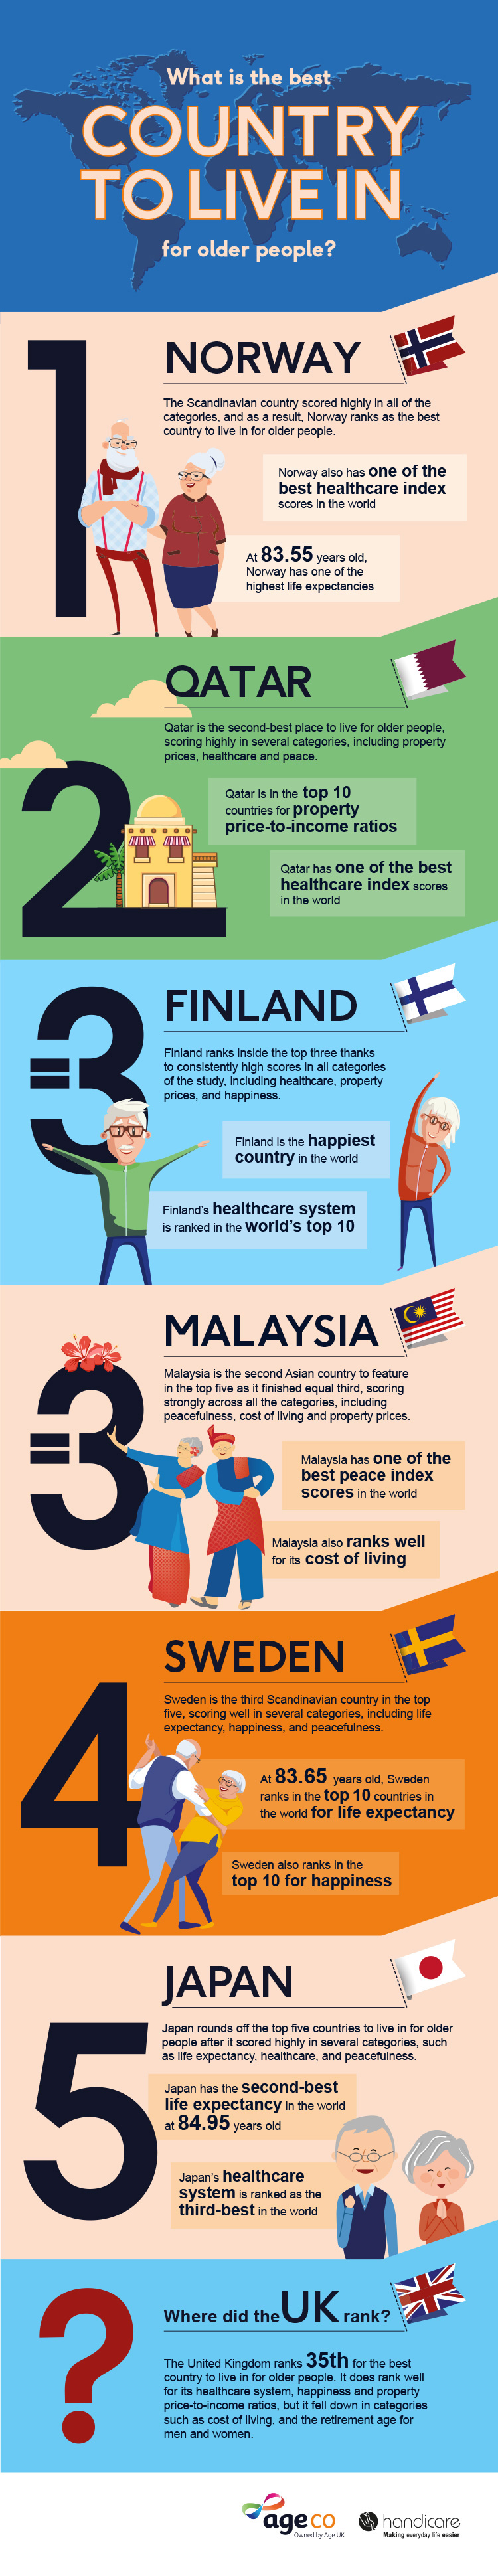 The best countries to live in for older people